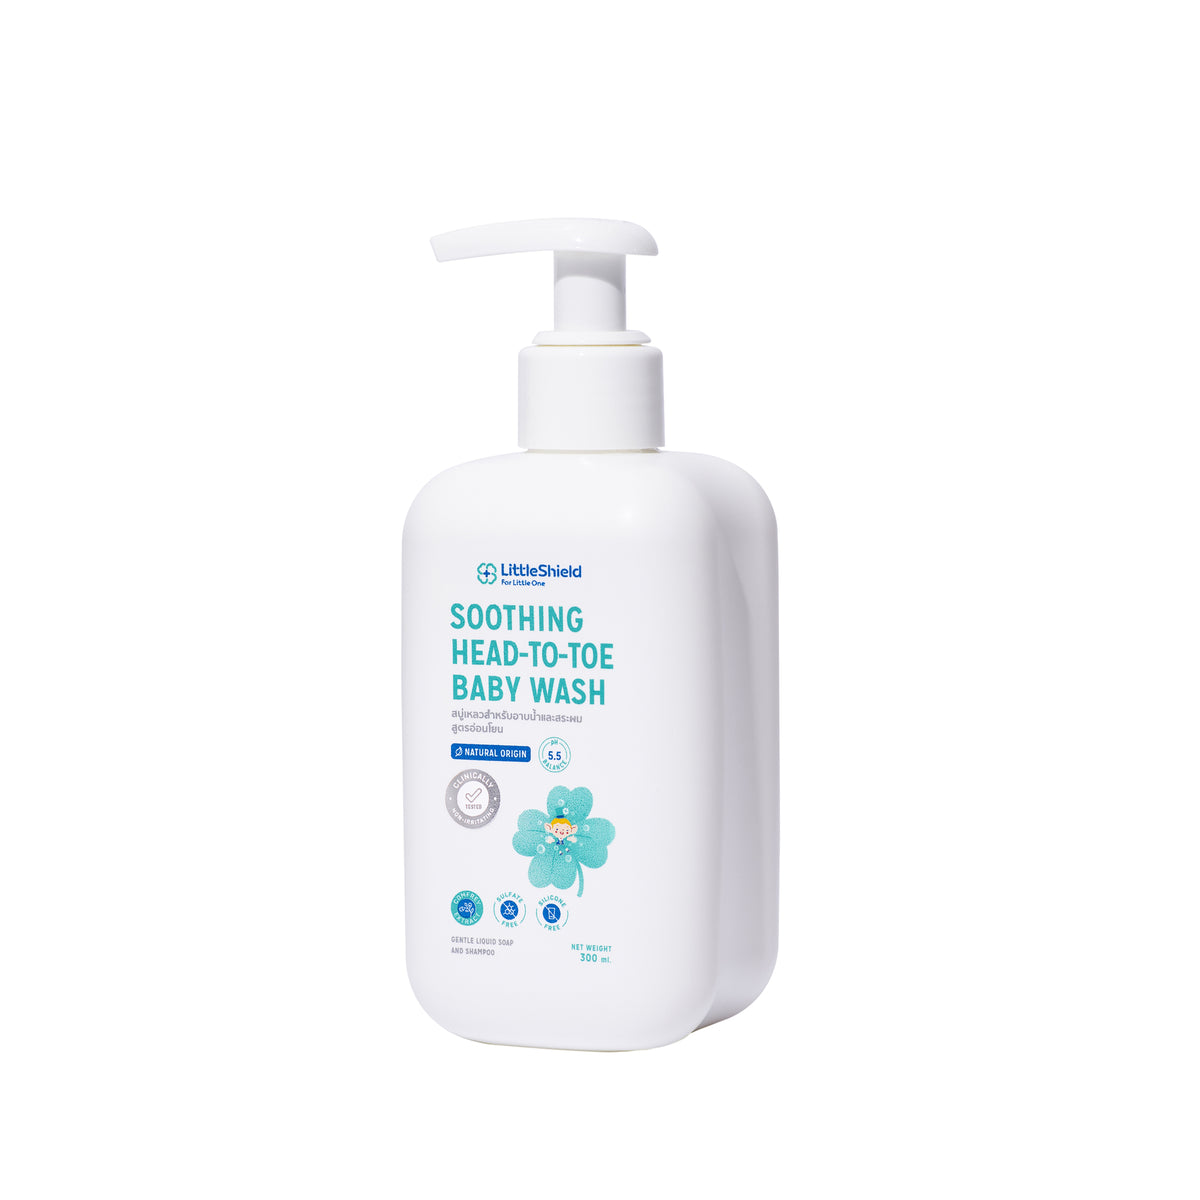 Little Shield Soothing Head-to-Toe Baby Wash 300ml